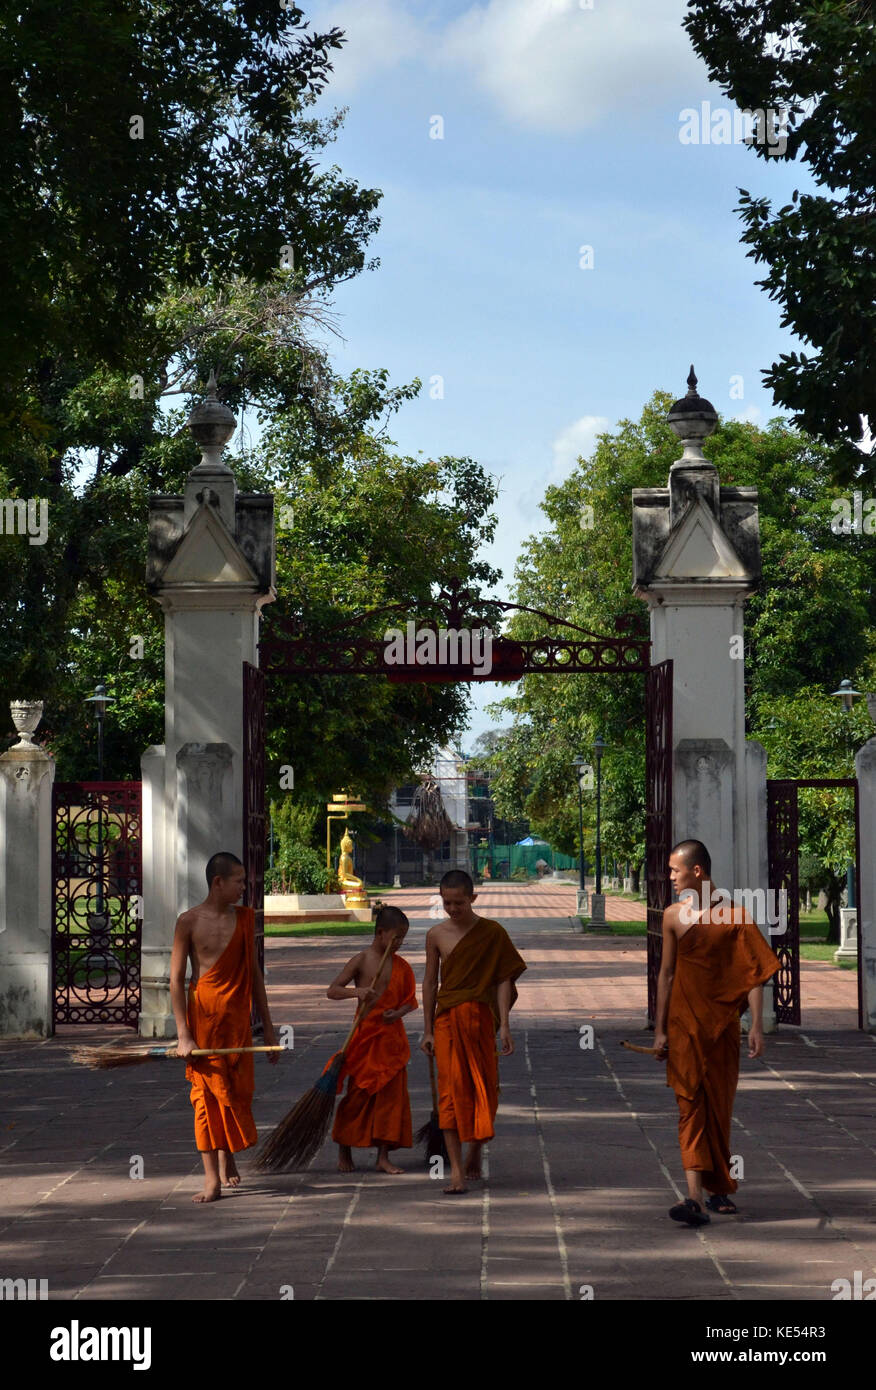 Young monks are interacting with each other in Bang Pa-In, Thailand. They're even bringing some brooms! Pic was taken in August 2015. Stock Photo